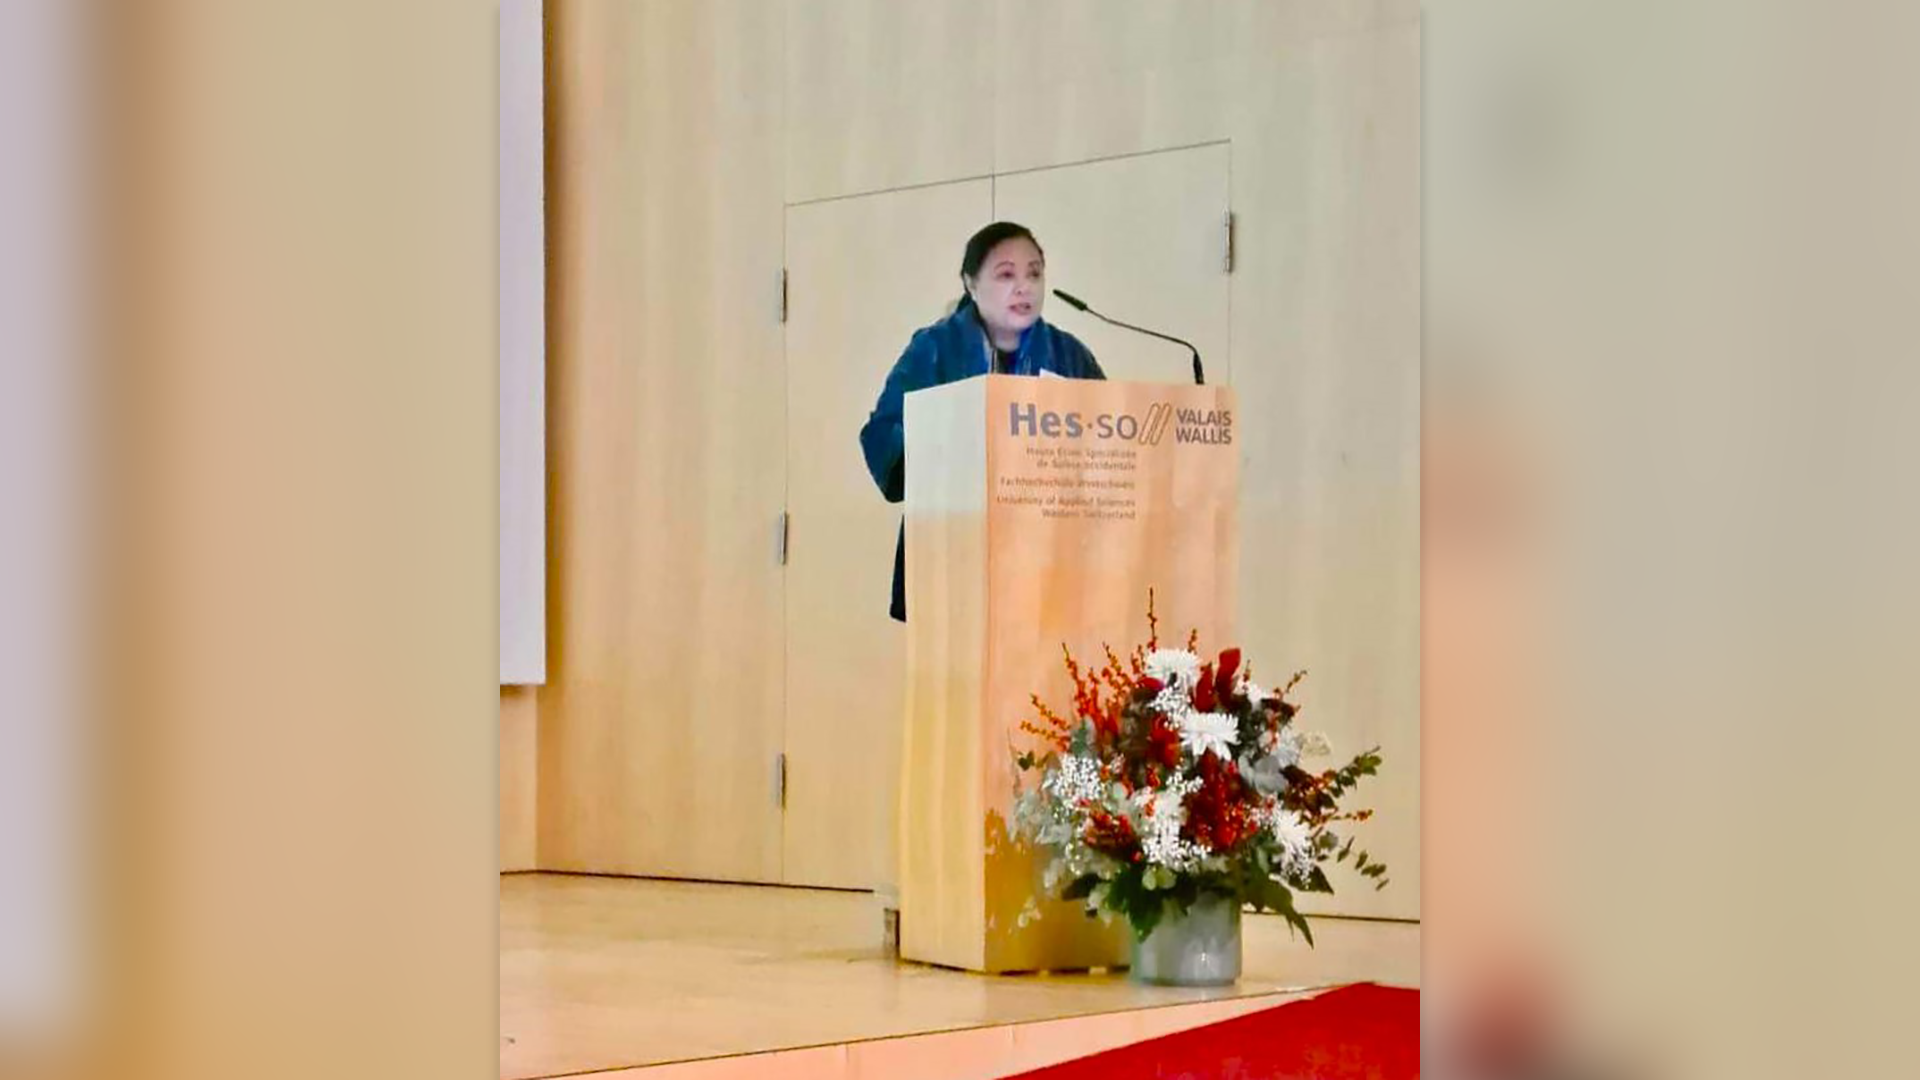 Professor Aguiling-Pangalangan lectures at the 13th International Conference